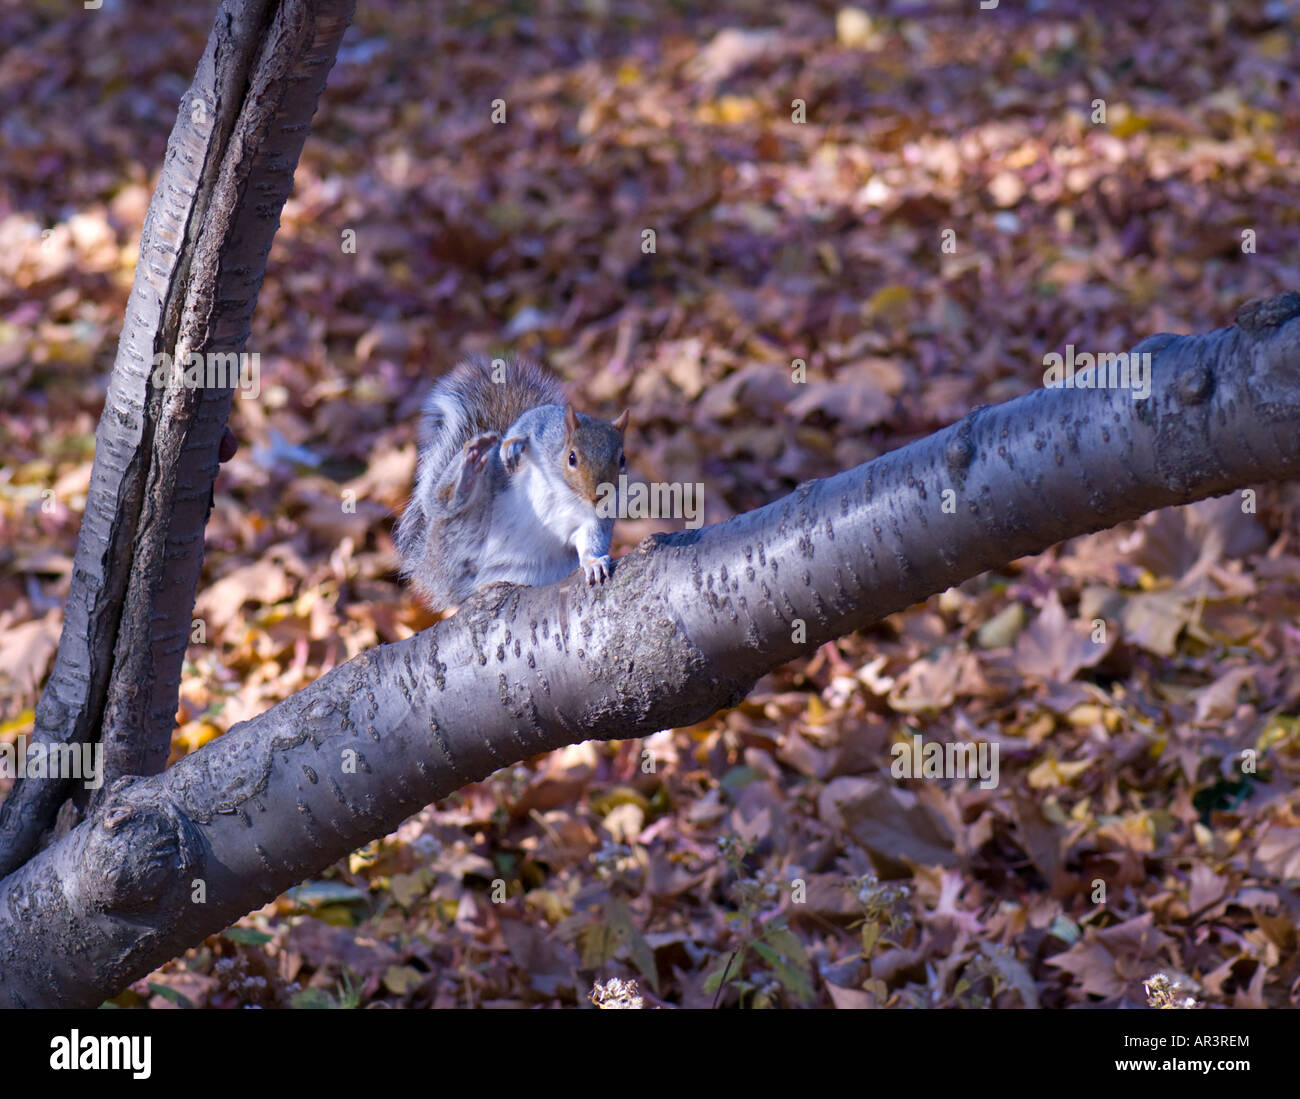 Gray Squirrel cleaning itself on tree branch Stock Photo